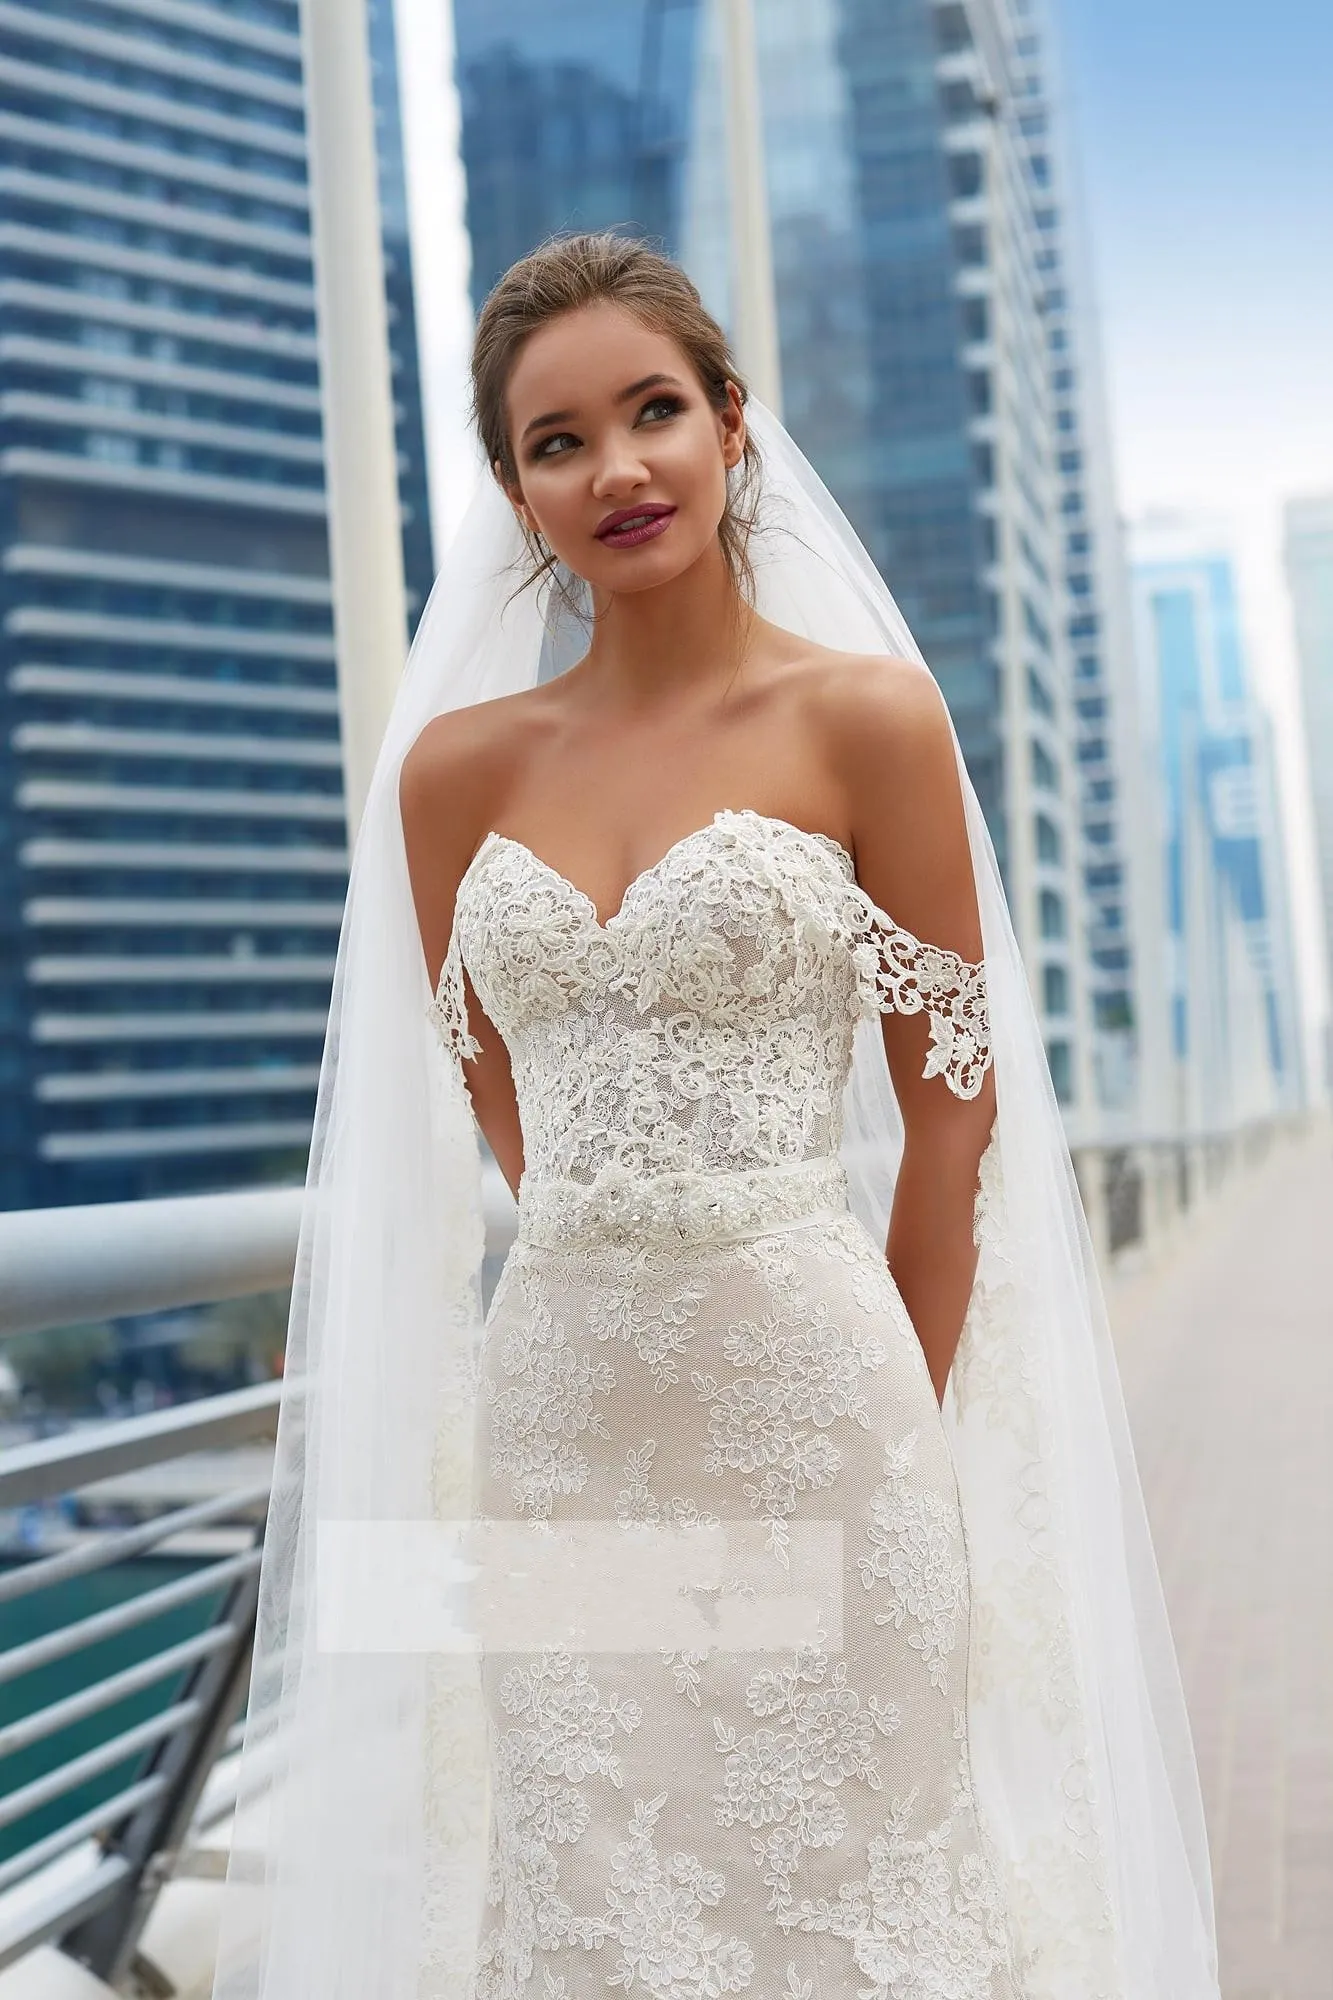 Modest Lace Mermaid Wedding Dresses 2018 Off Shoulder Applique Beach Beho Sweetheart Sashes Pearls Corset Plus Size Bridal Gowns Custom Made